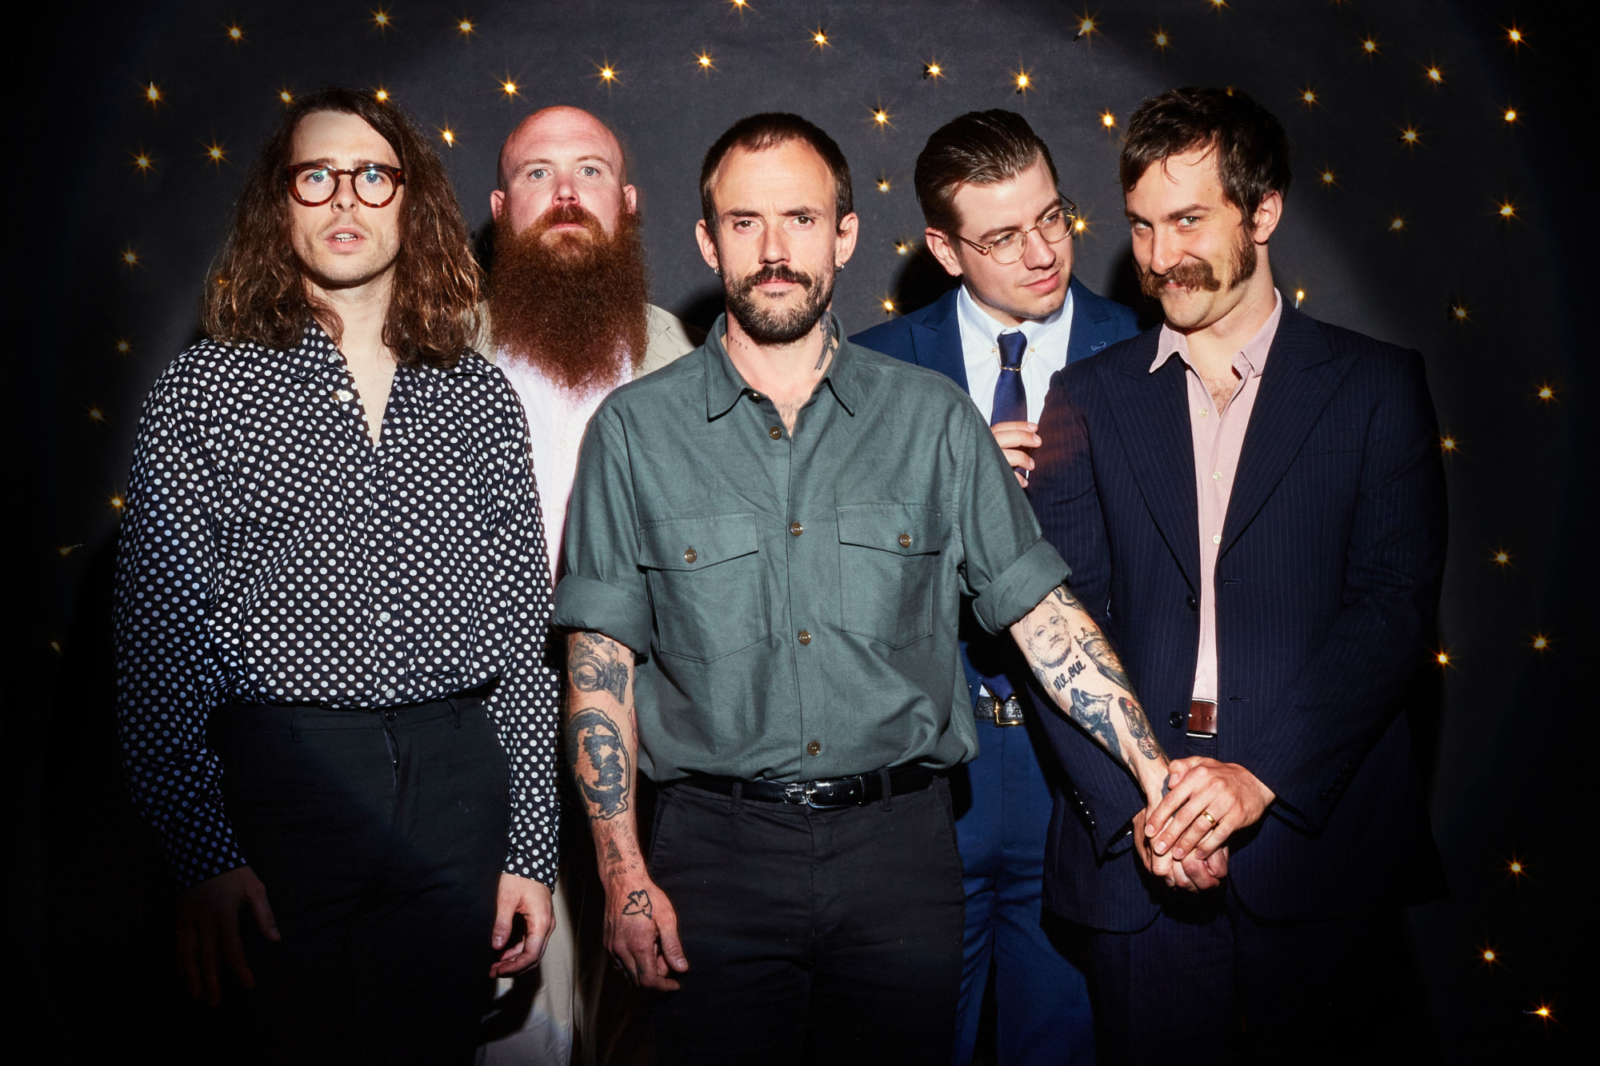 IDLES are the cover stars of DIY's 100th issue!